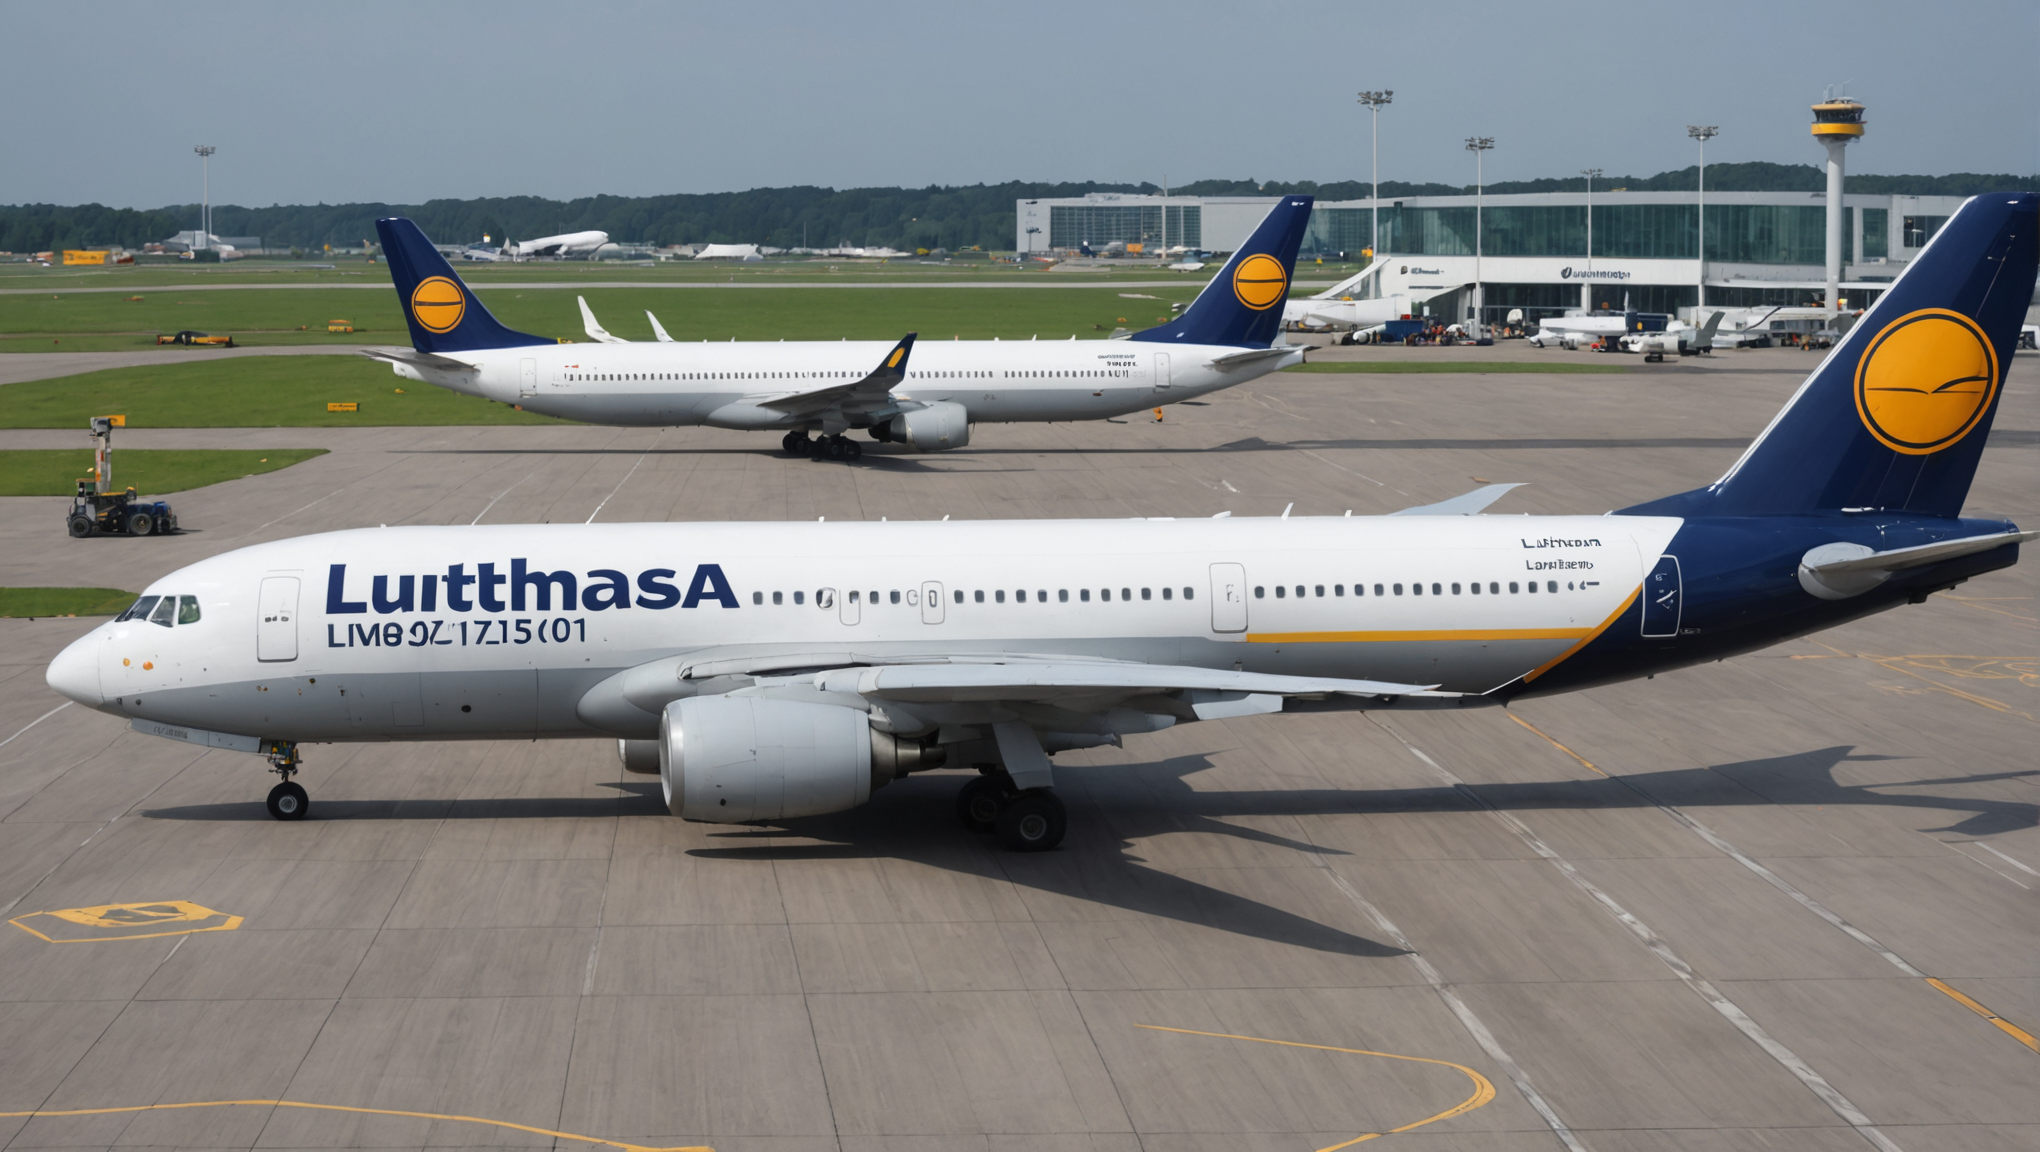 find out how lufthansa could face an annual loss of 500 million euros due to aircraft delivery delays.